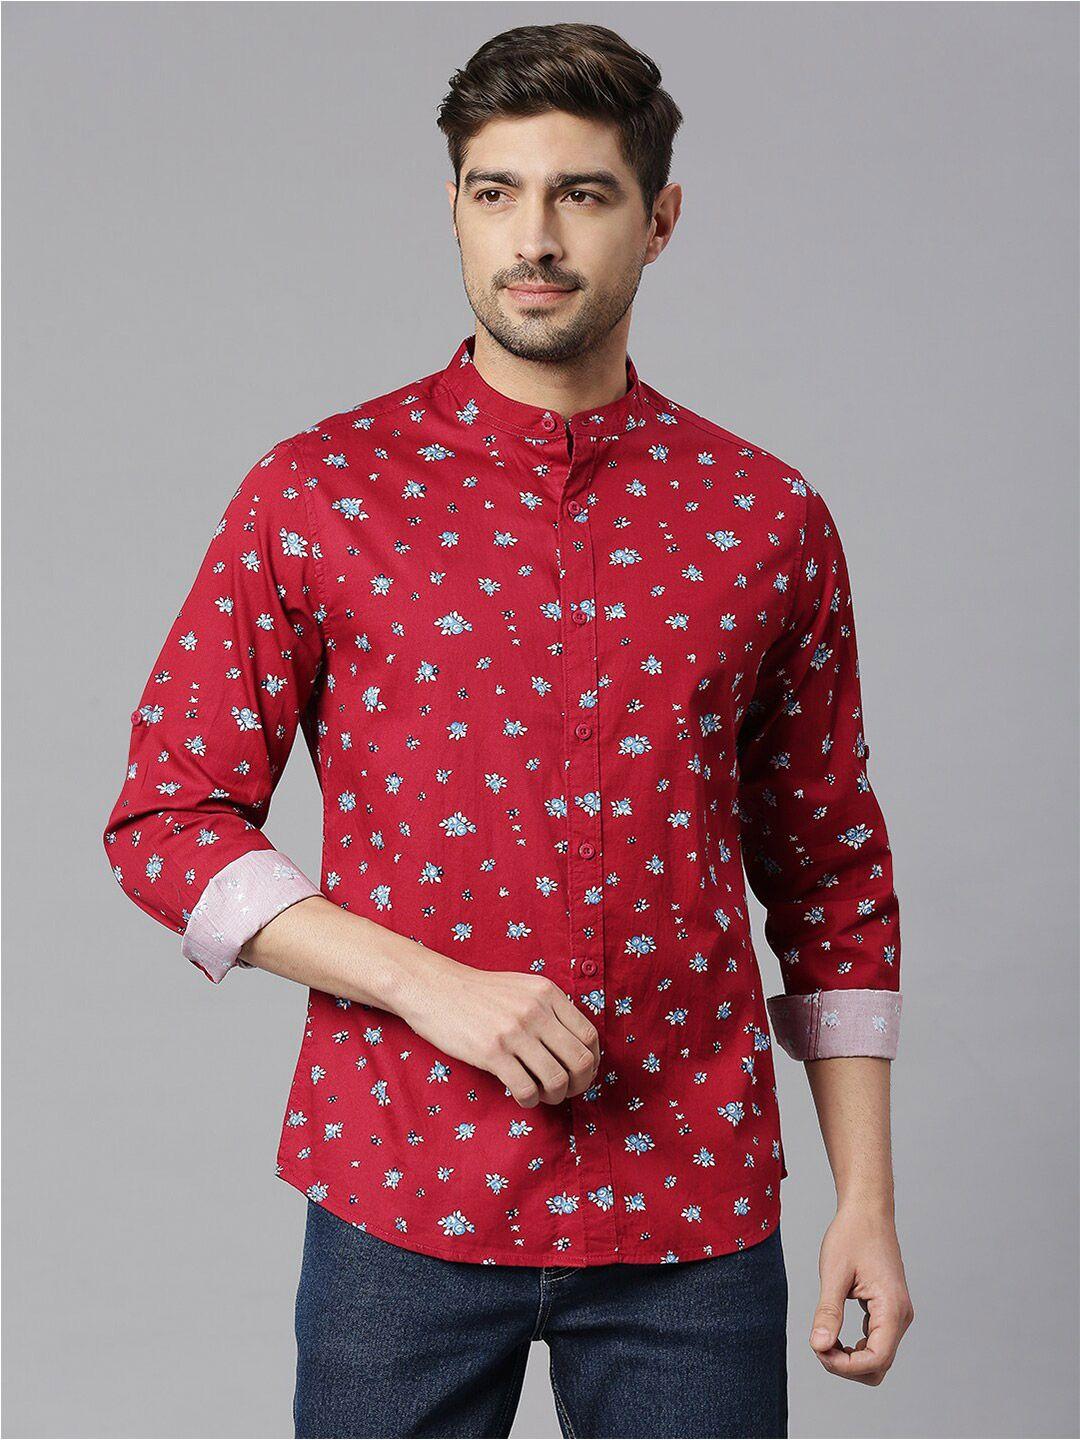 here&now maroon classic slim fit floral printed mandarin collar pure cotton casual shirt